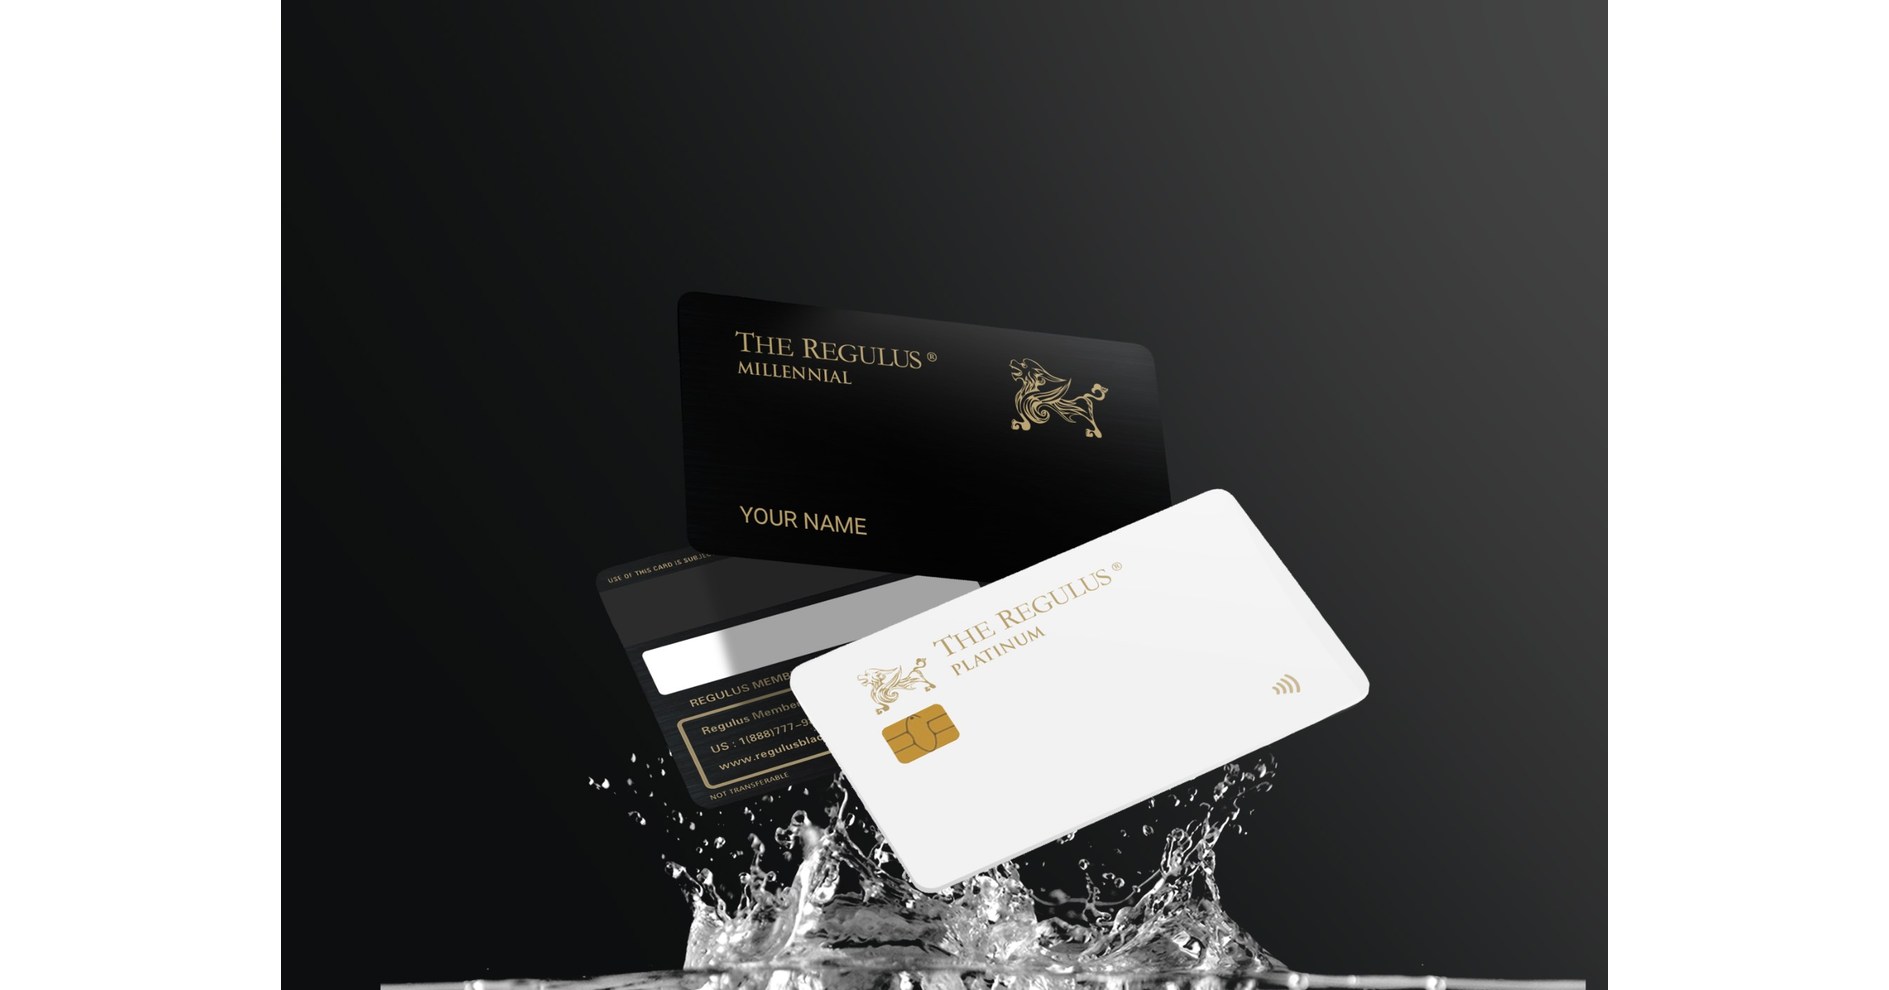 The Regulus: Defining a New Era of Chinese Luxury